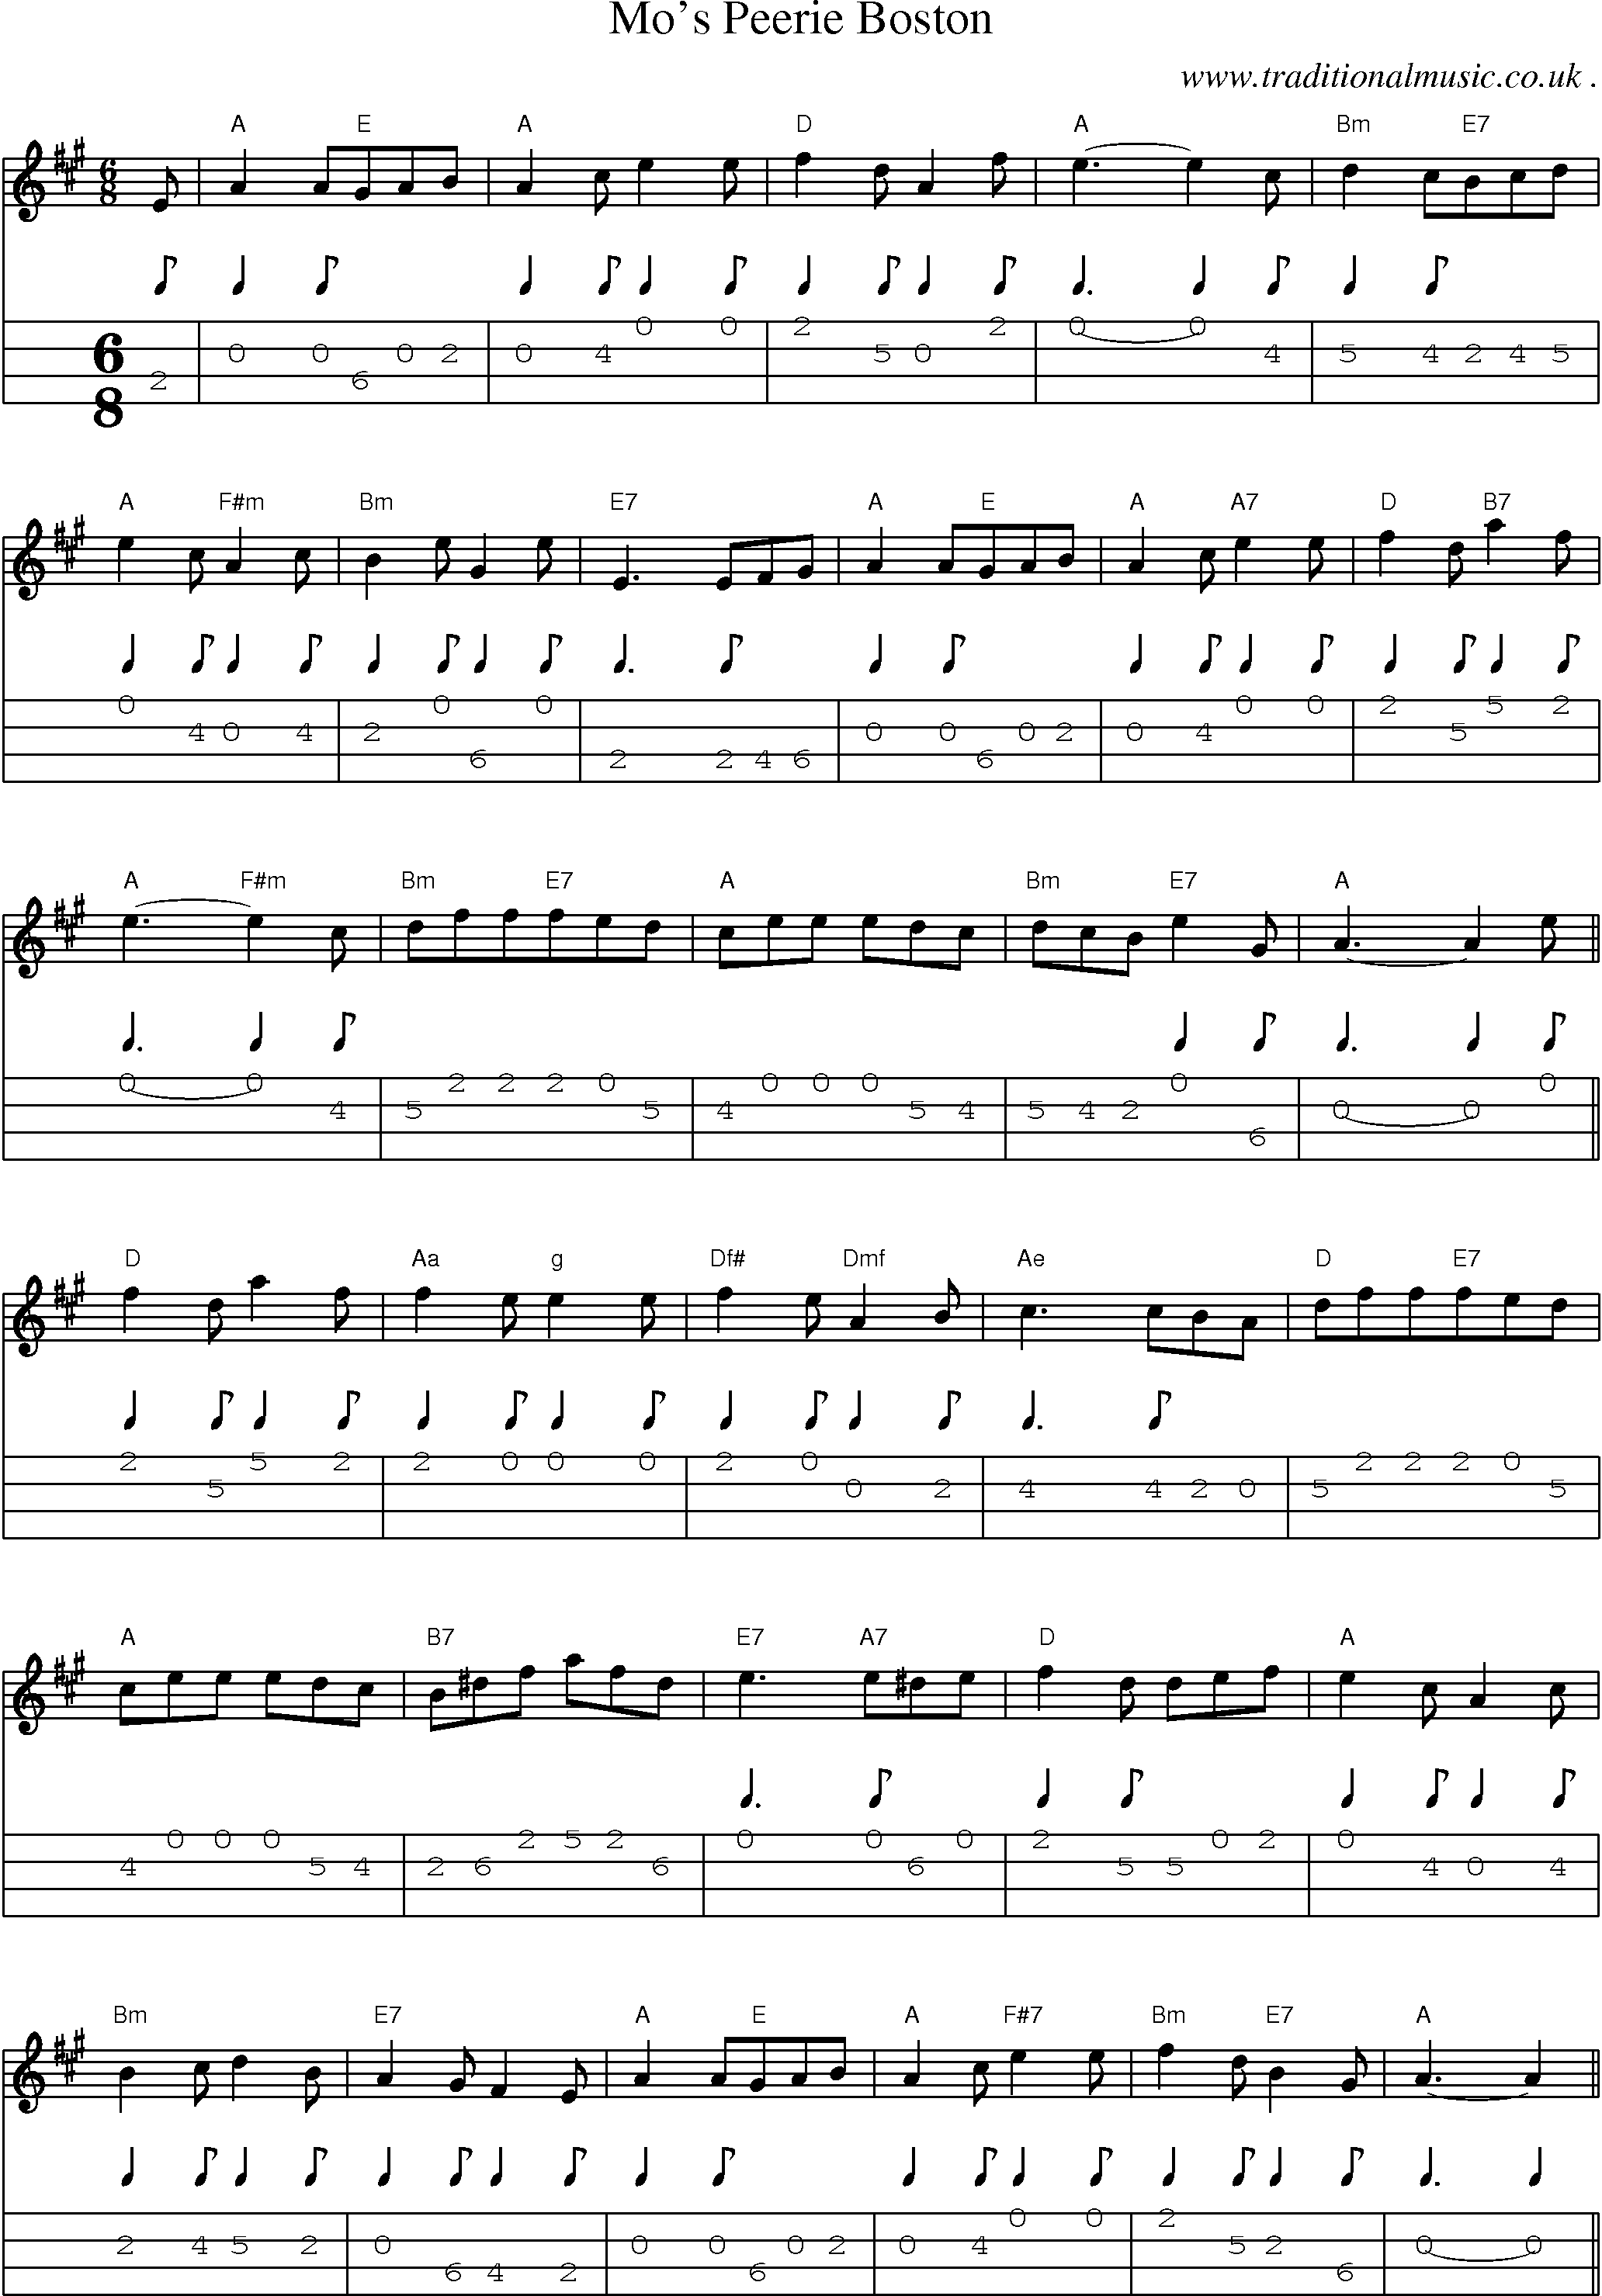 Sheet-Music and Mandolin Tabs for Mos Peerie Boston